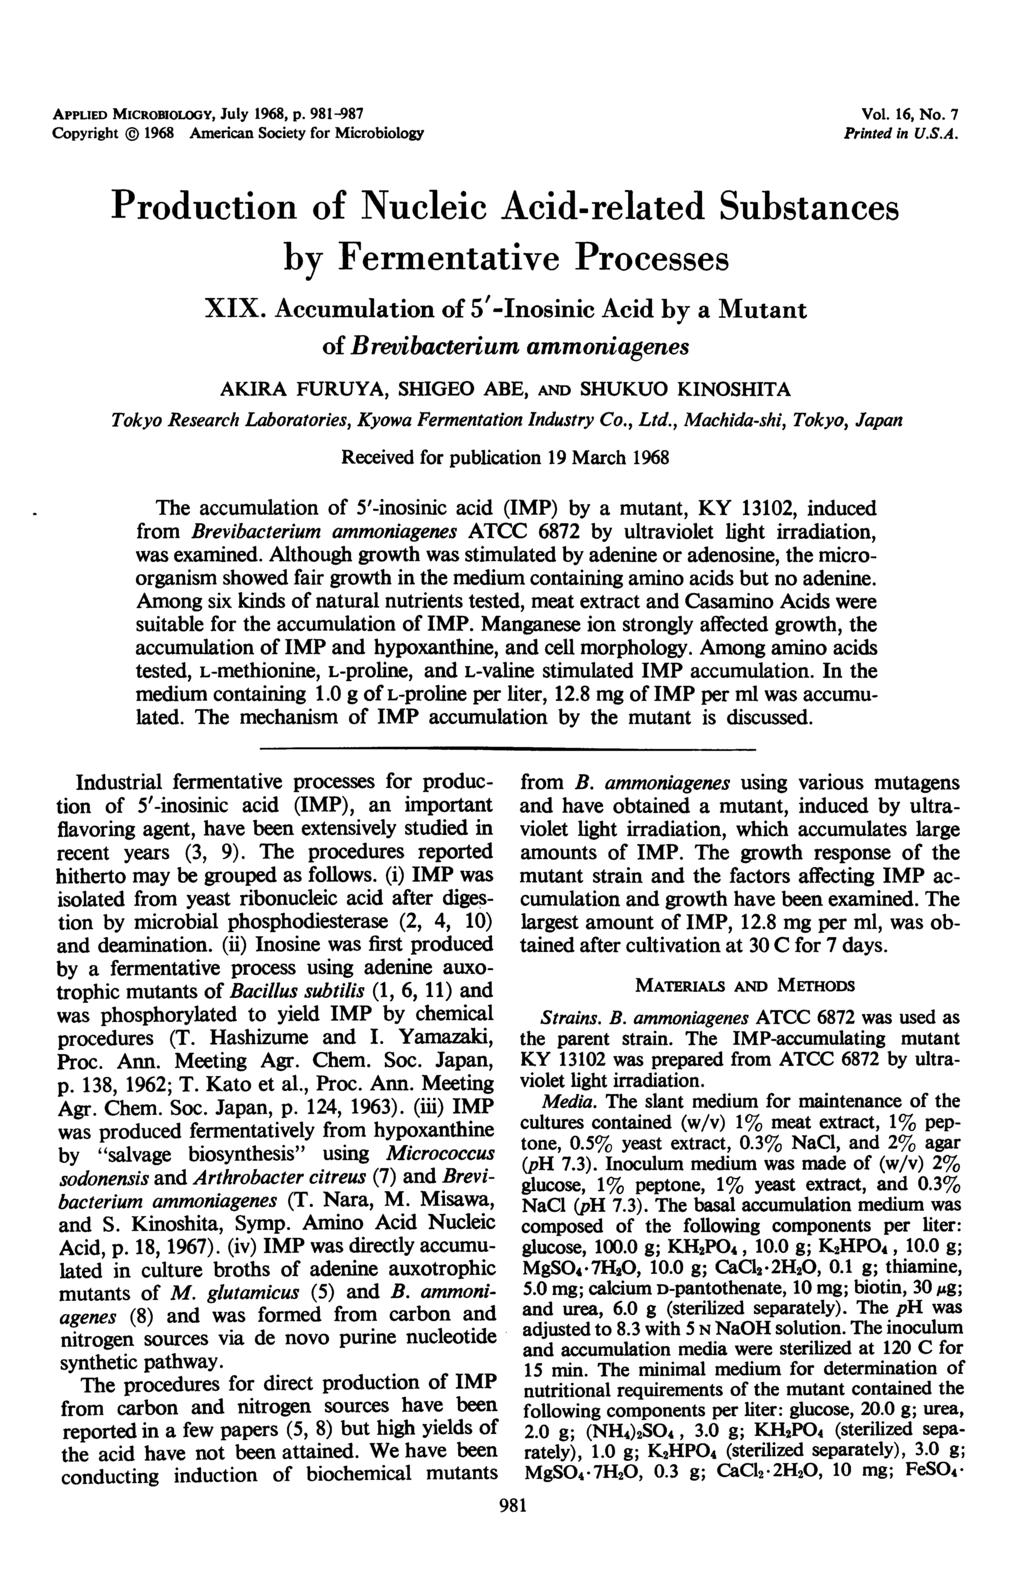 APPLID MICROBIOLOGY, JUly 1968, p. 981-987 Vol. 16, No. 7 Copyright 1968 American Society for Microbiology Printed in U.S.A. Production of Nucleic Acid-related Substances by Fermentative Processes XIX.